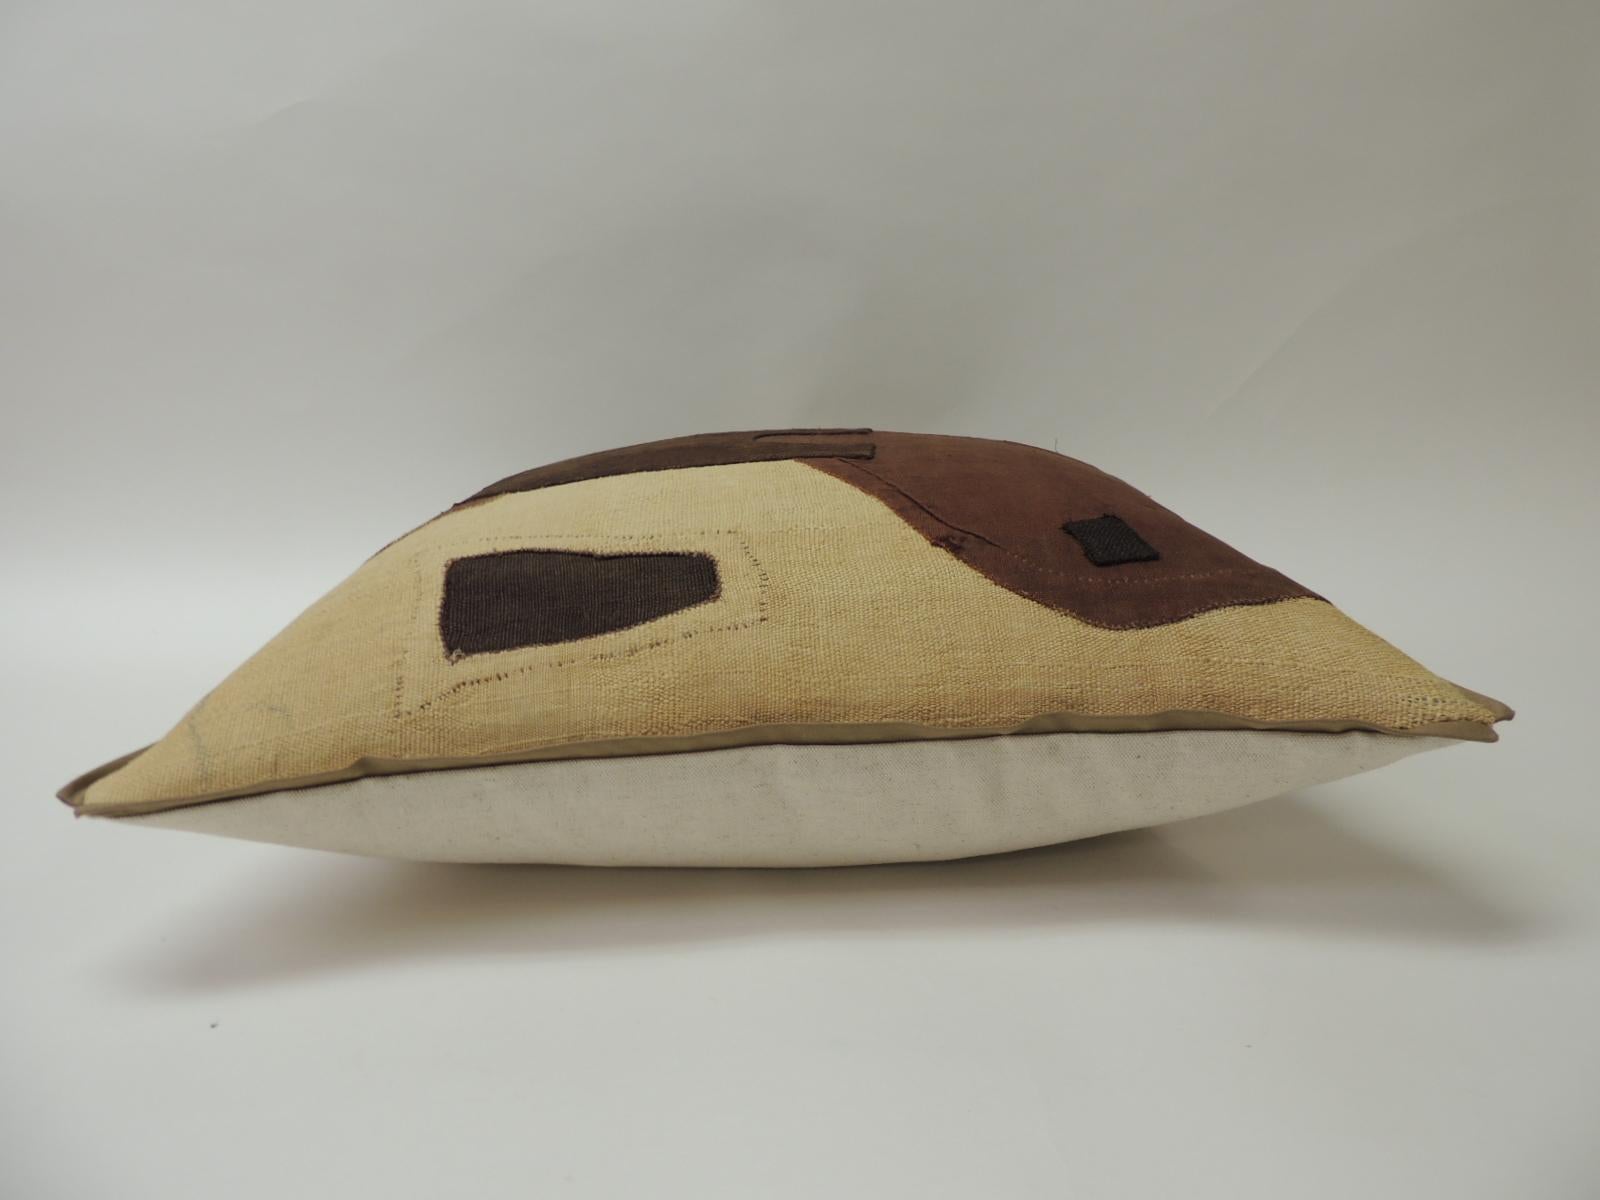 Hand-Crafted Applique Raffia Brown and Black Kuba Decorative Pillows Matisse Style